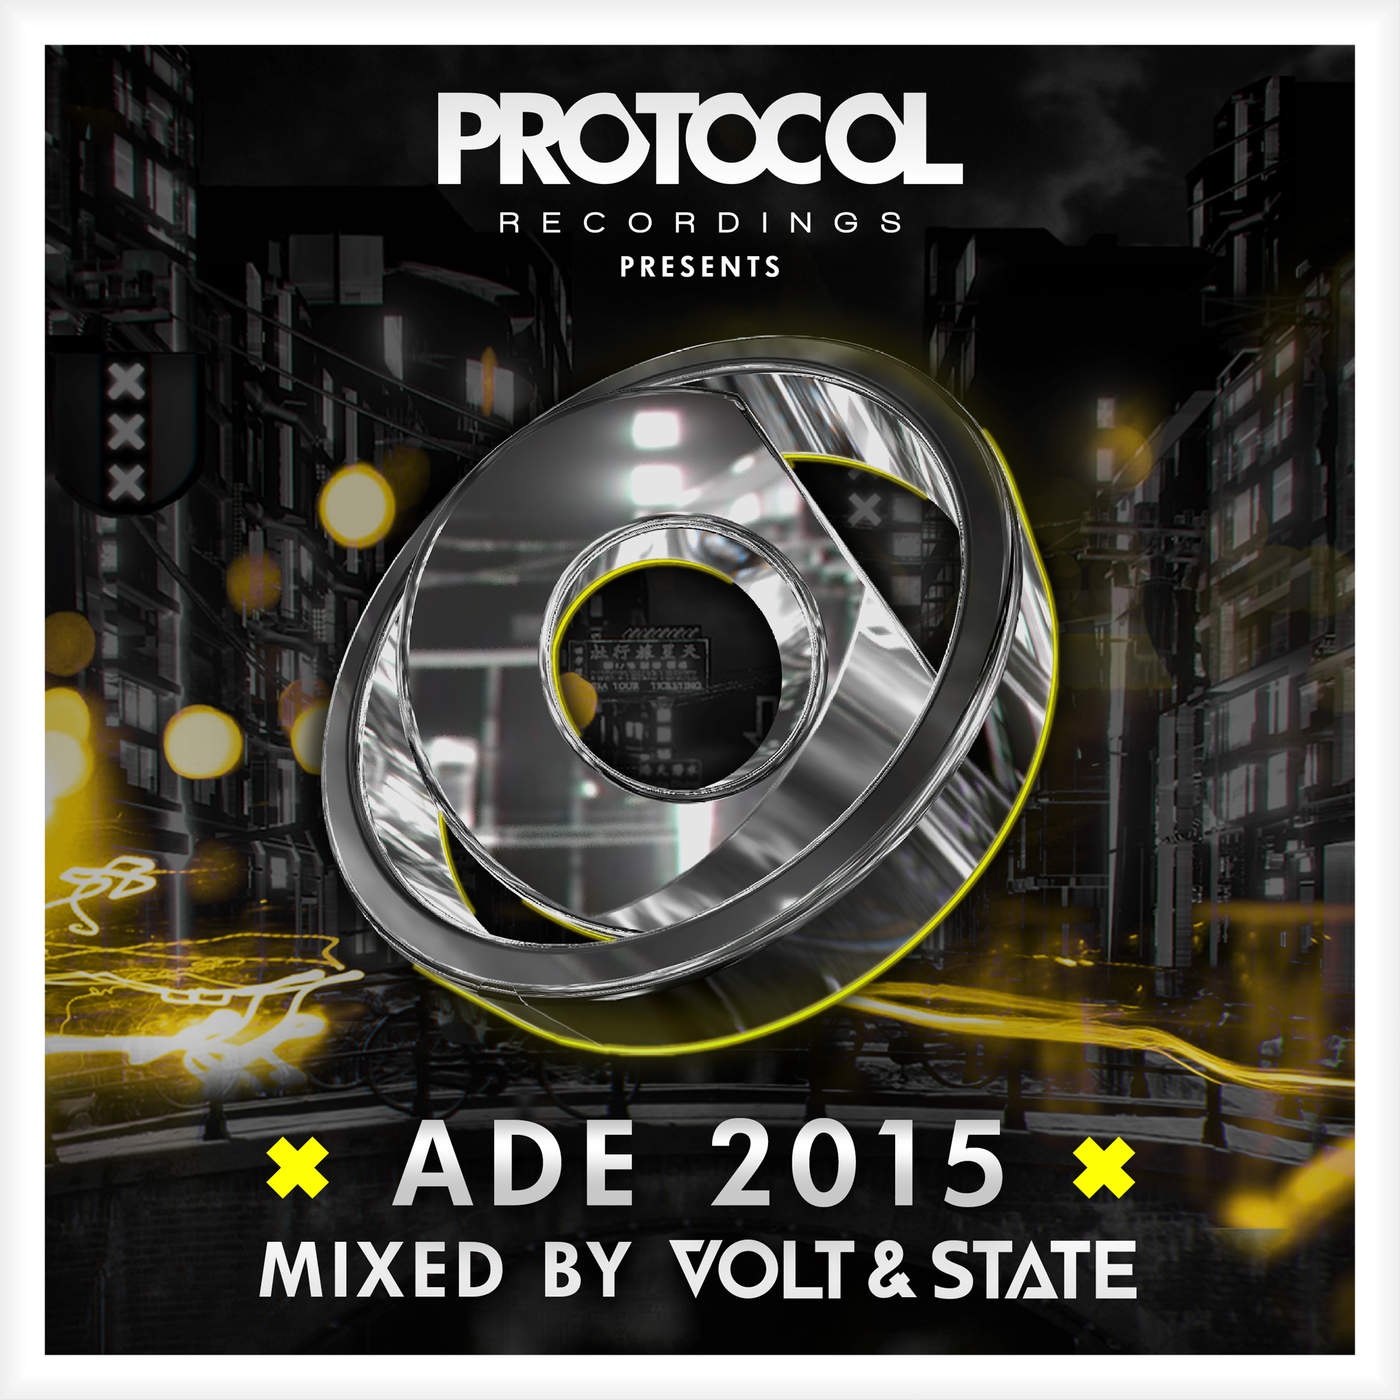 Protocol presents: ADE 2015 (Mixed by Volt & State)